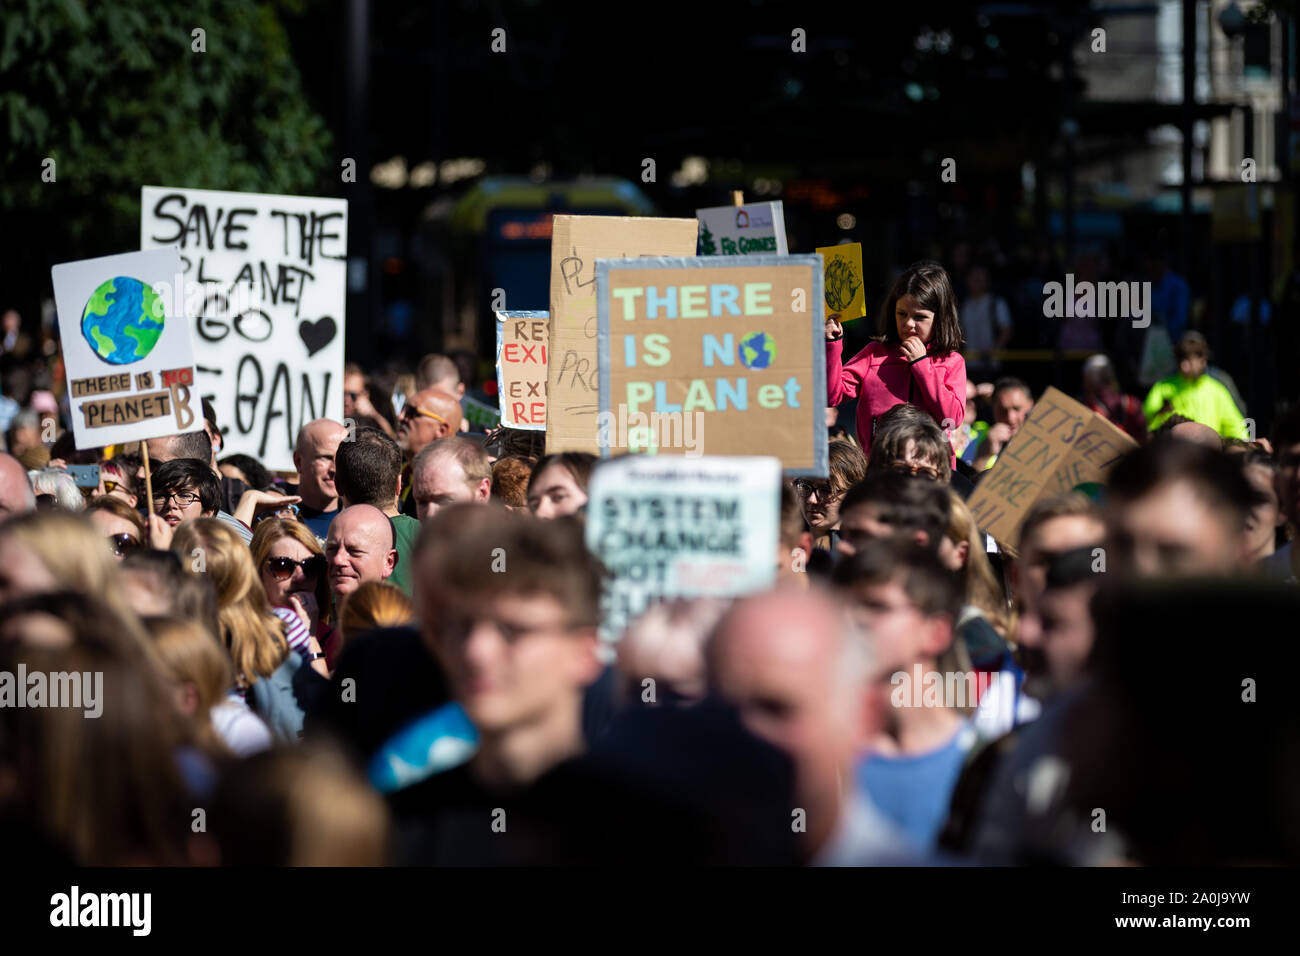 Manchester, UK. 20 September, 2019. Thousands of people took the streets of the city this afternoon to raise awareness for climate change. The demonstration has been organised to coincide with the UN Climate Action Summit which is held in New York next week. Similar demonstrations were also held all around the country. Andy Barton/Alamy Live News Stock Photo